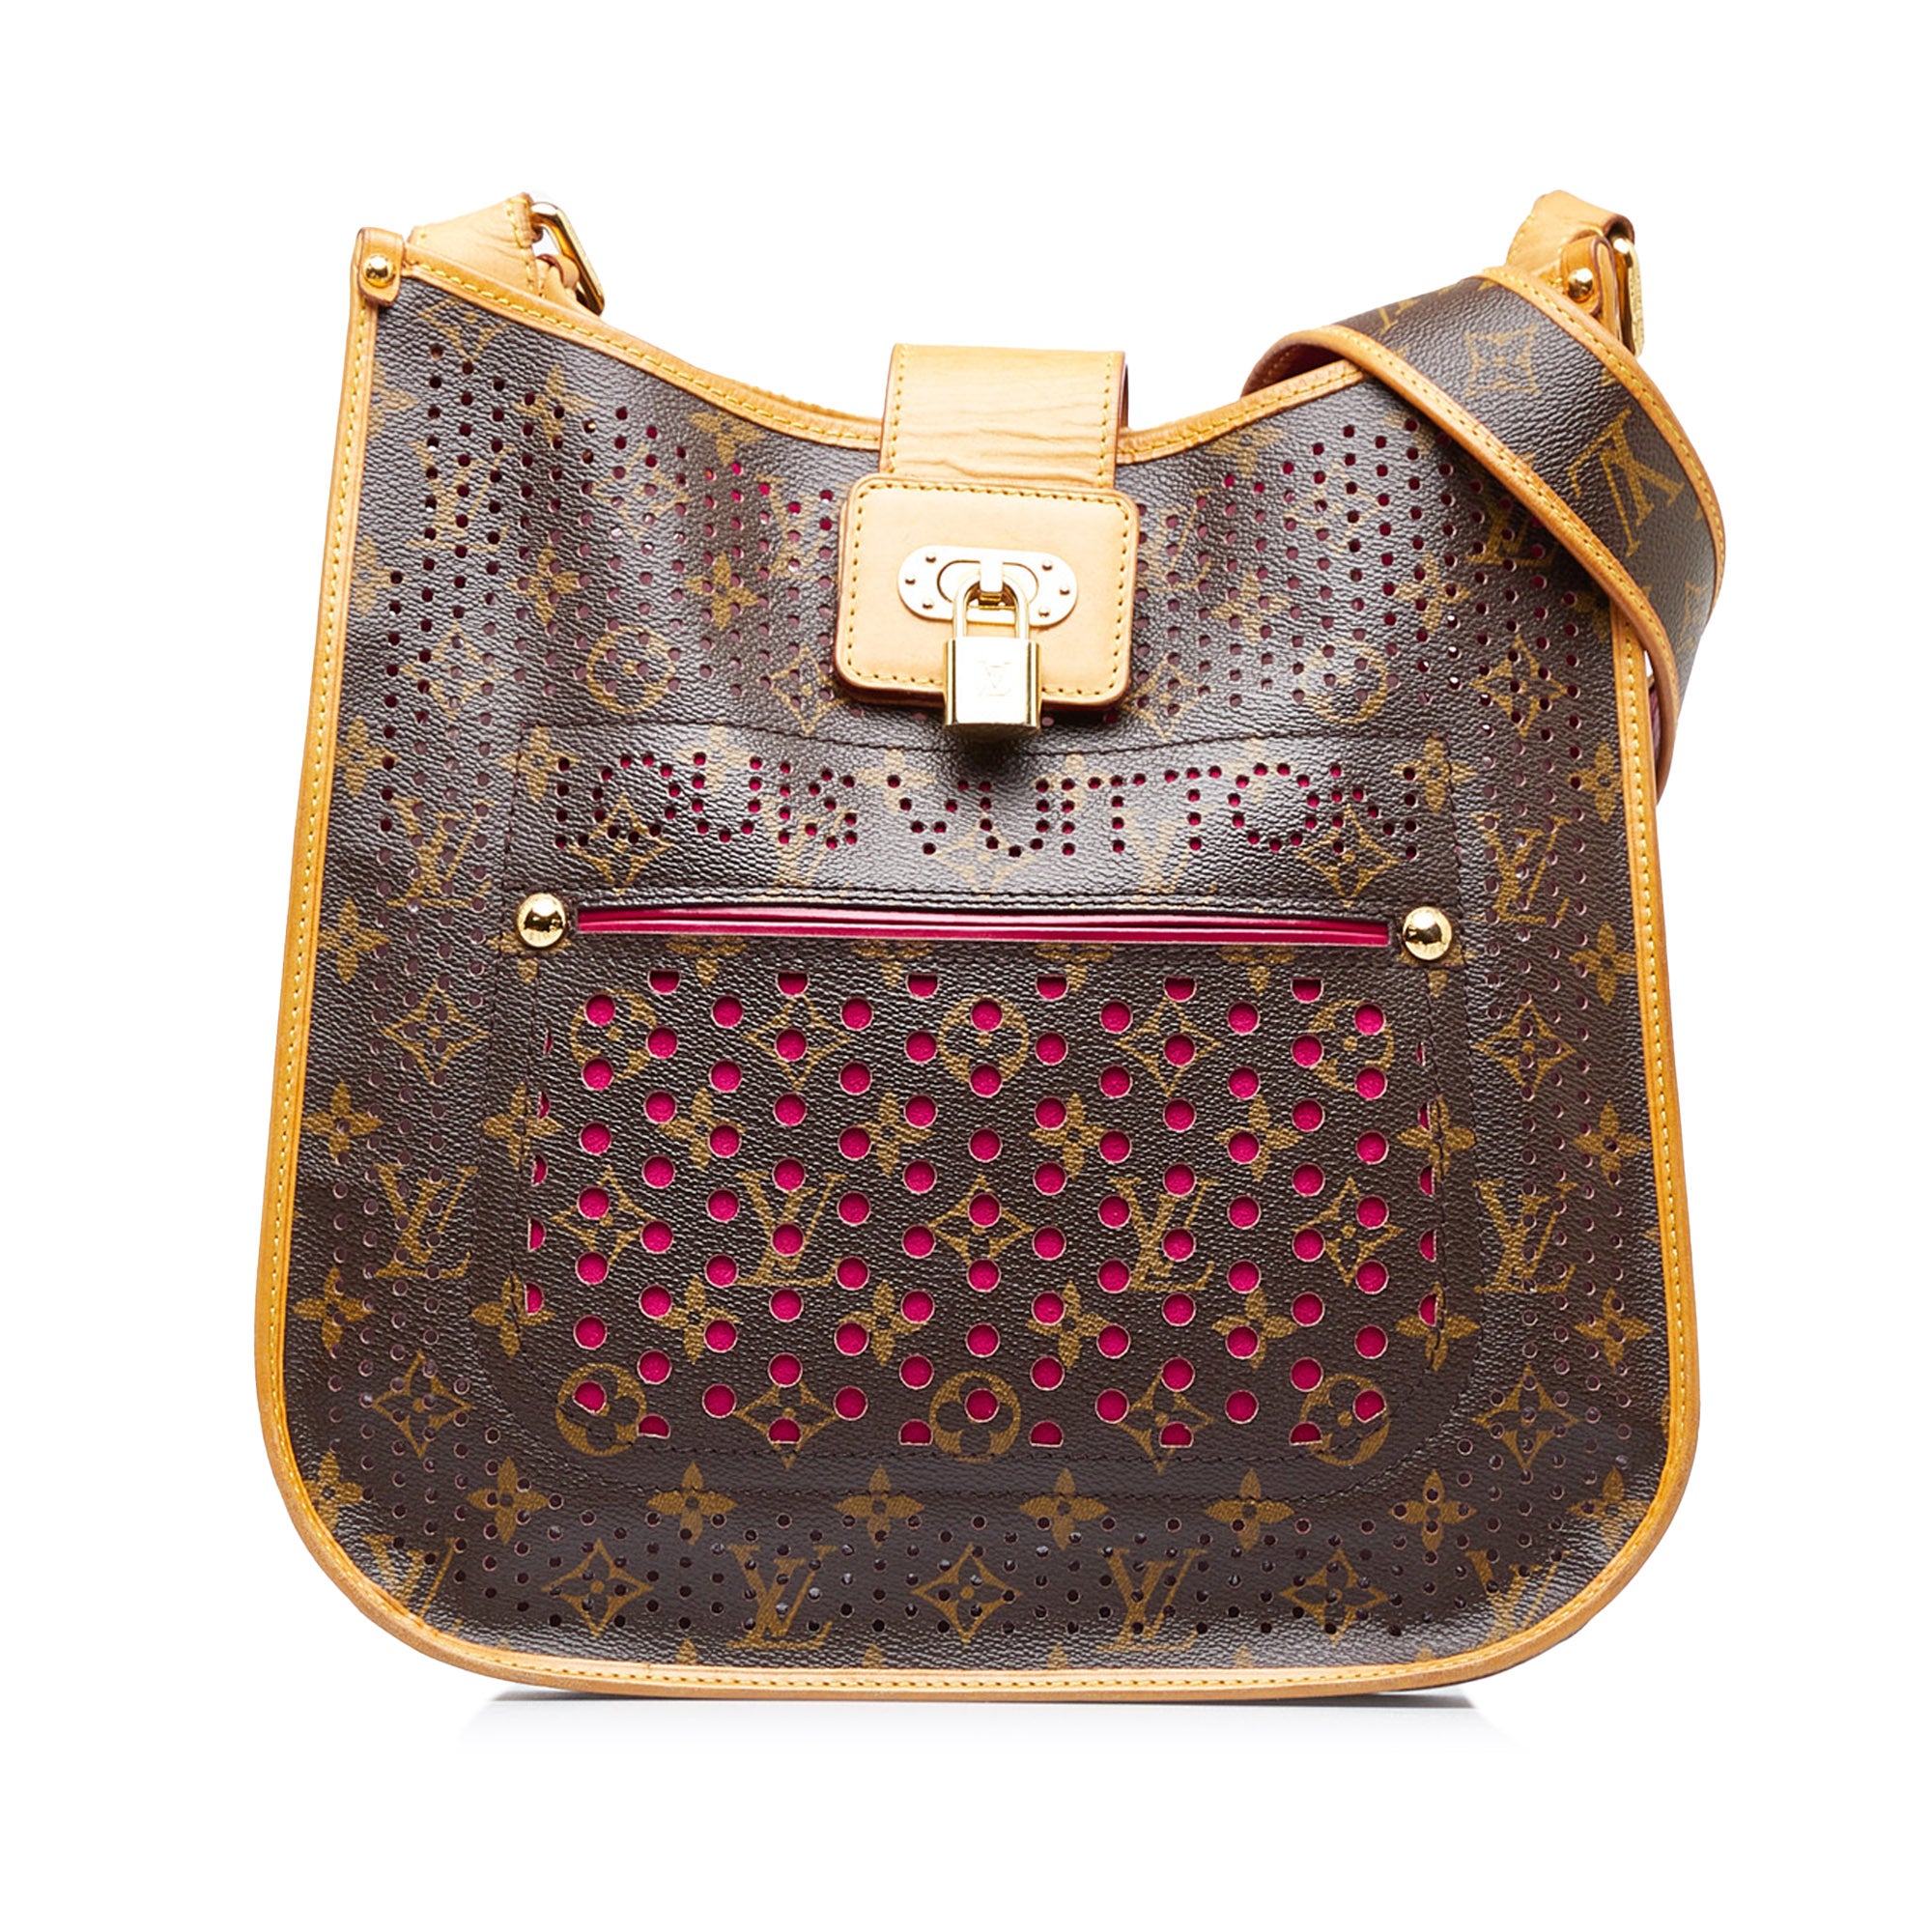 LV Perforated Musette Bag